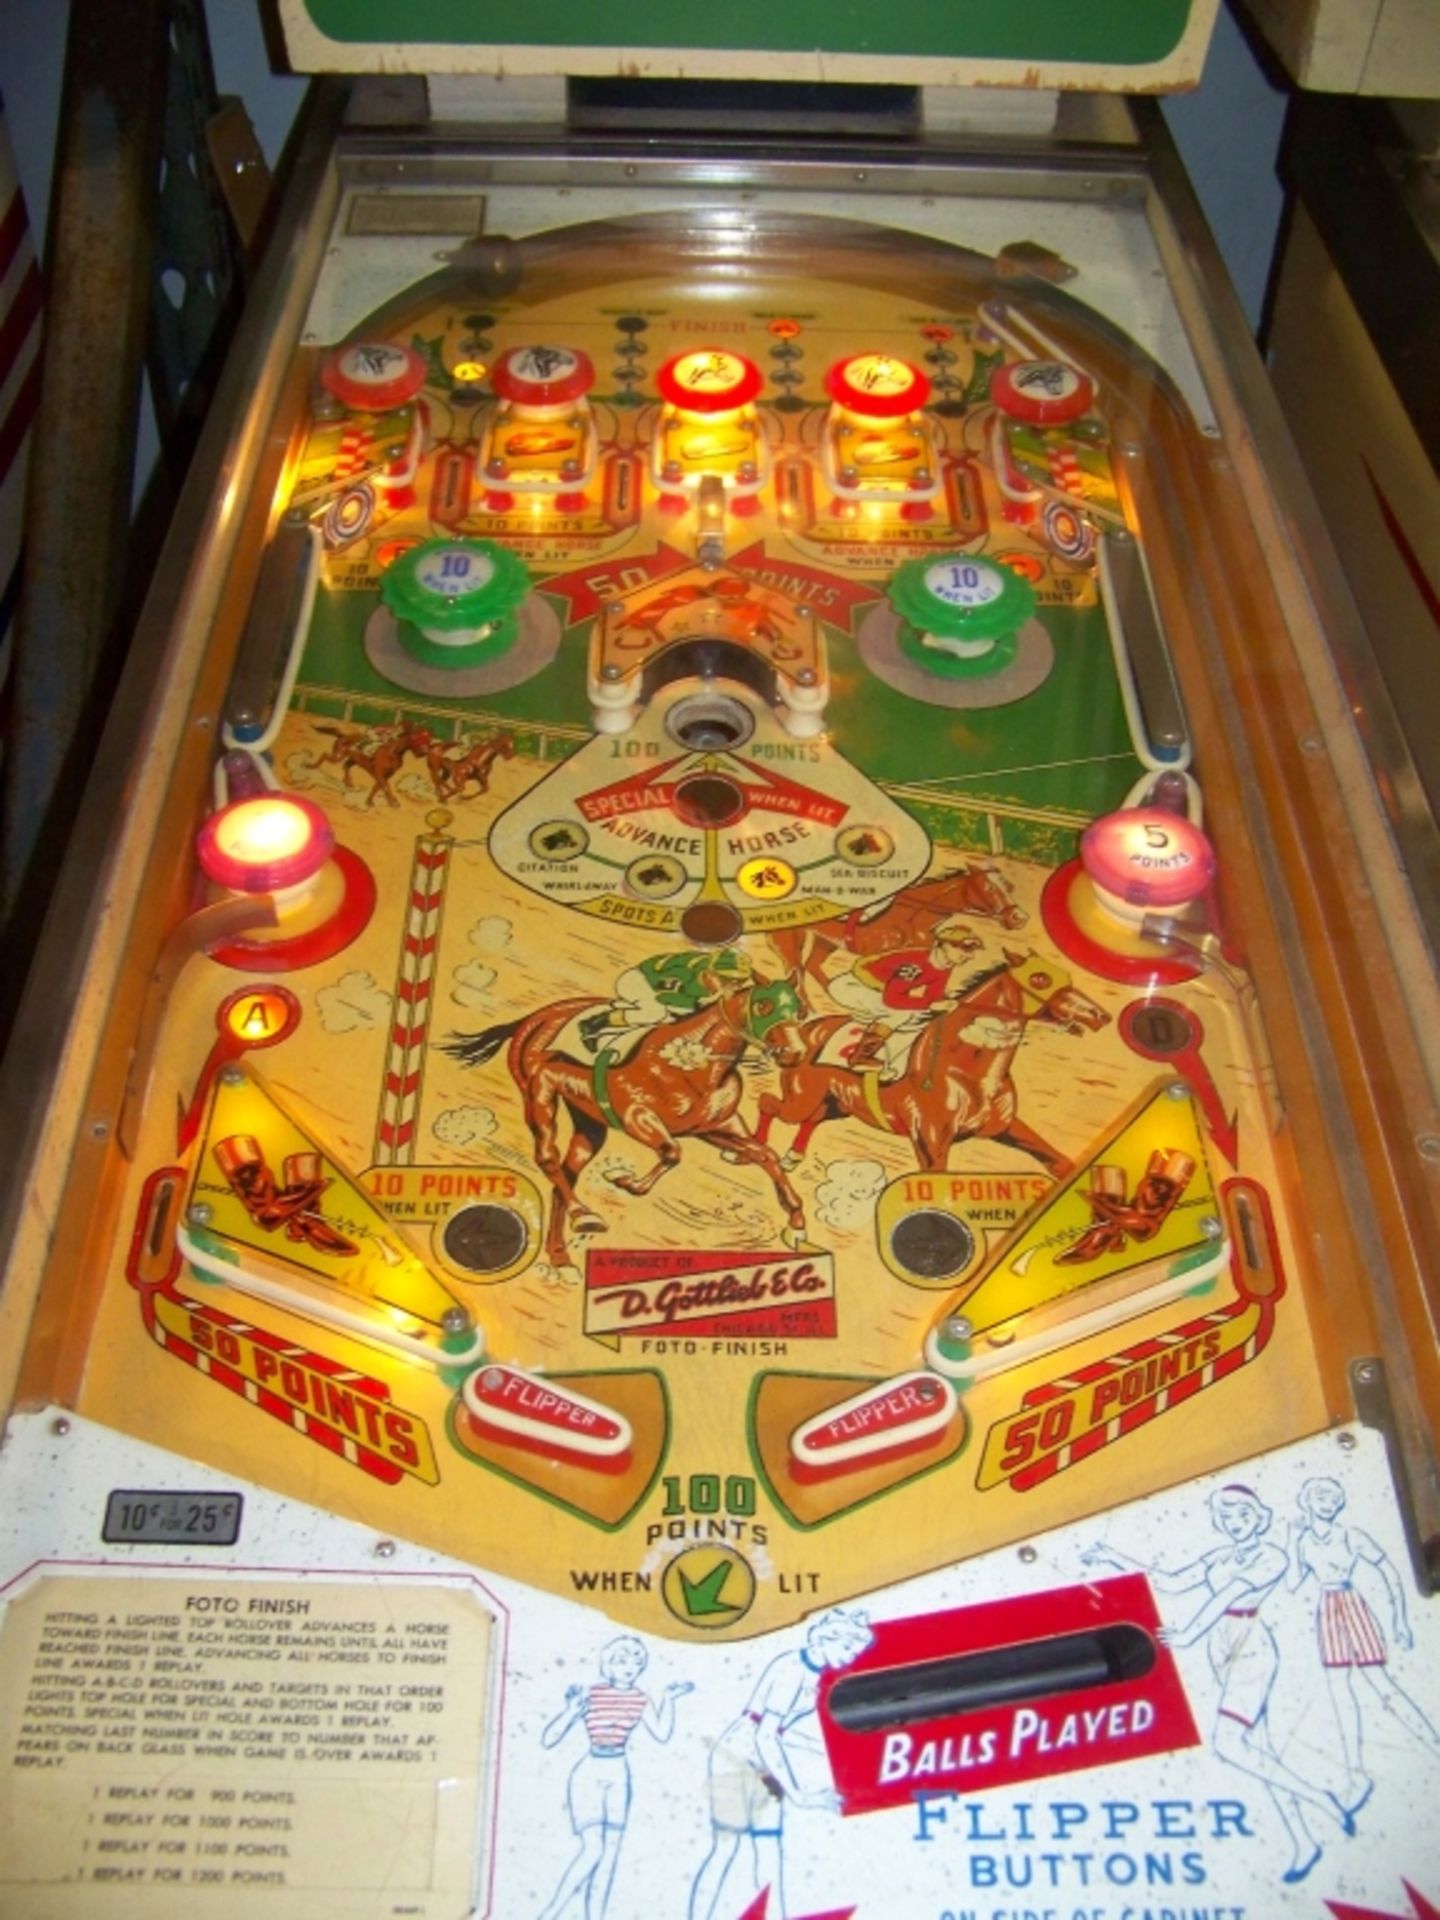 FOTO FINISH PINBALL MACHINE GOTTLIEB 1961 Item is in used condition. Evidence of wear and commercial - Image 5 of 7